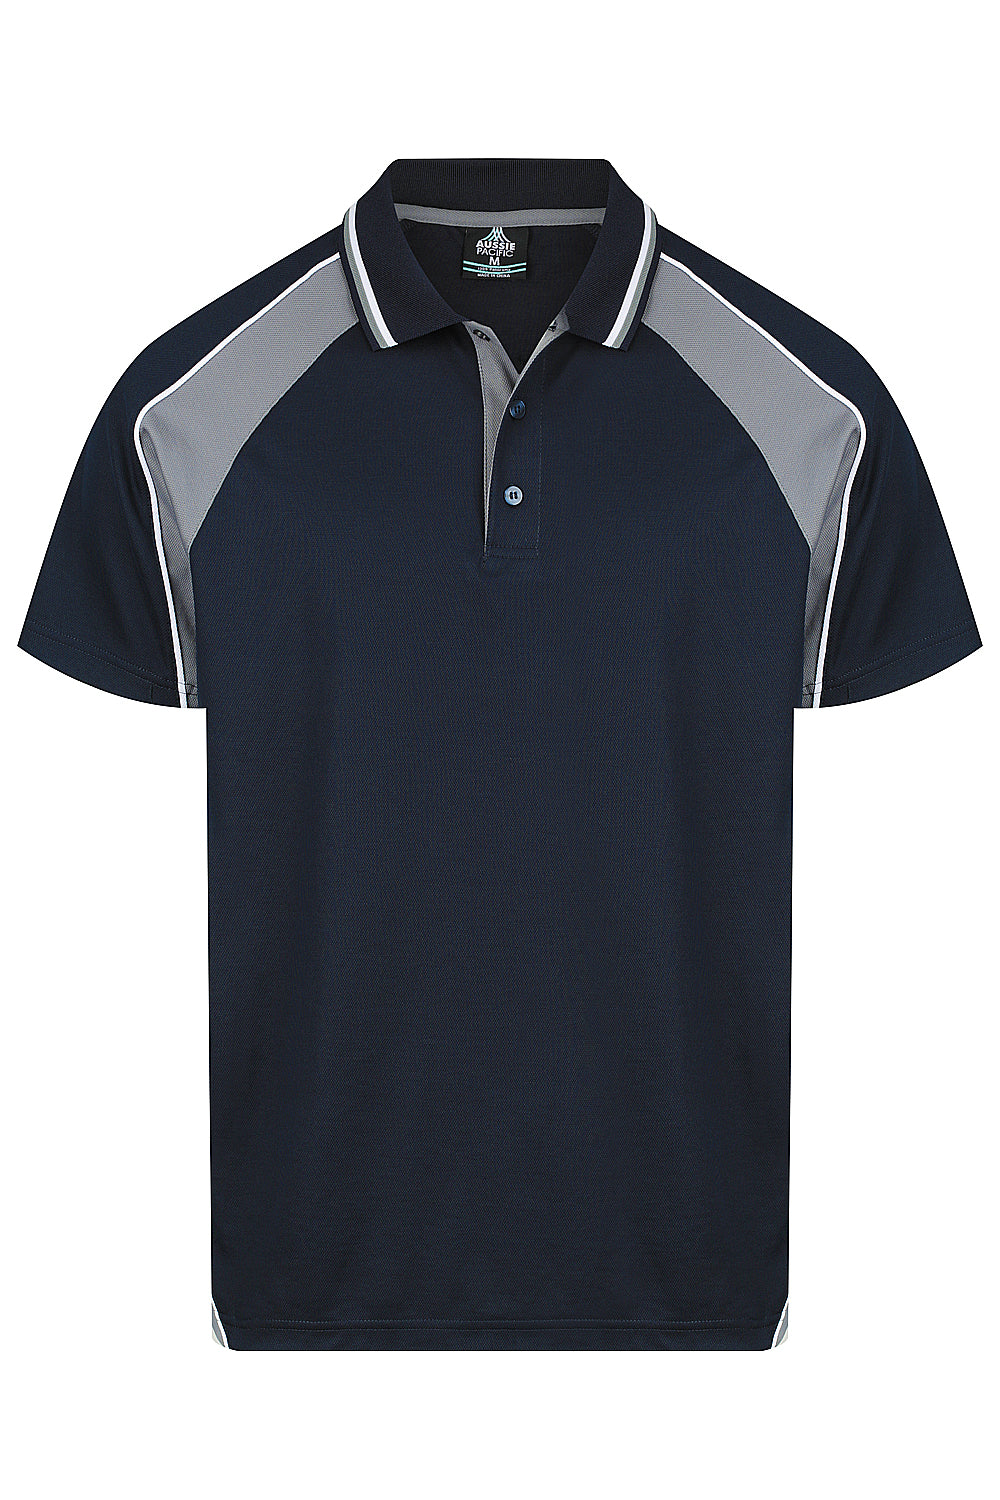 PANORAMA MENS POLOS RUNOUT - 1309-Aussie Pacific-56